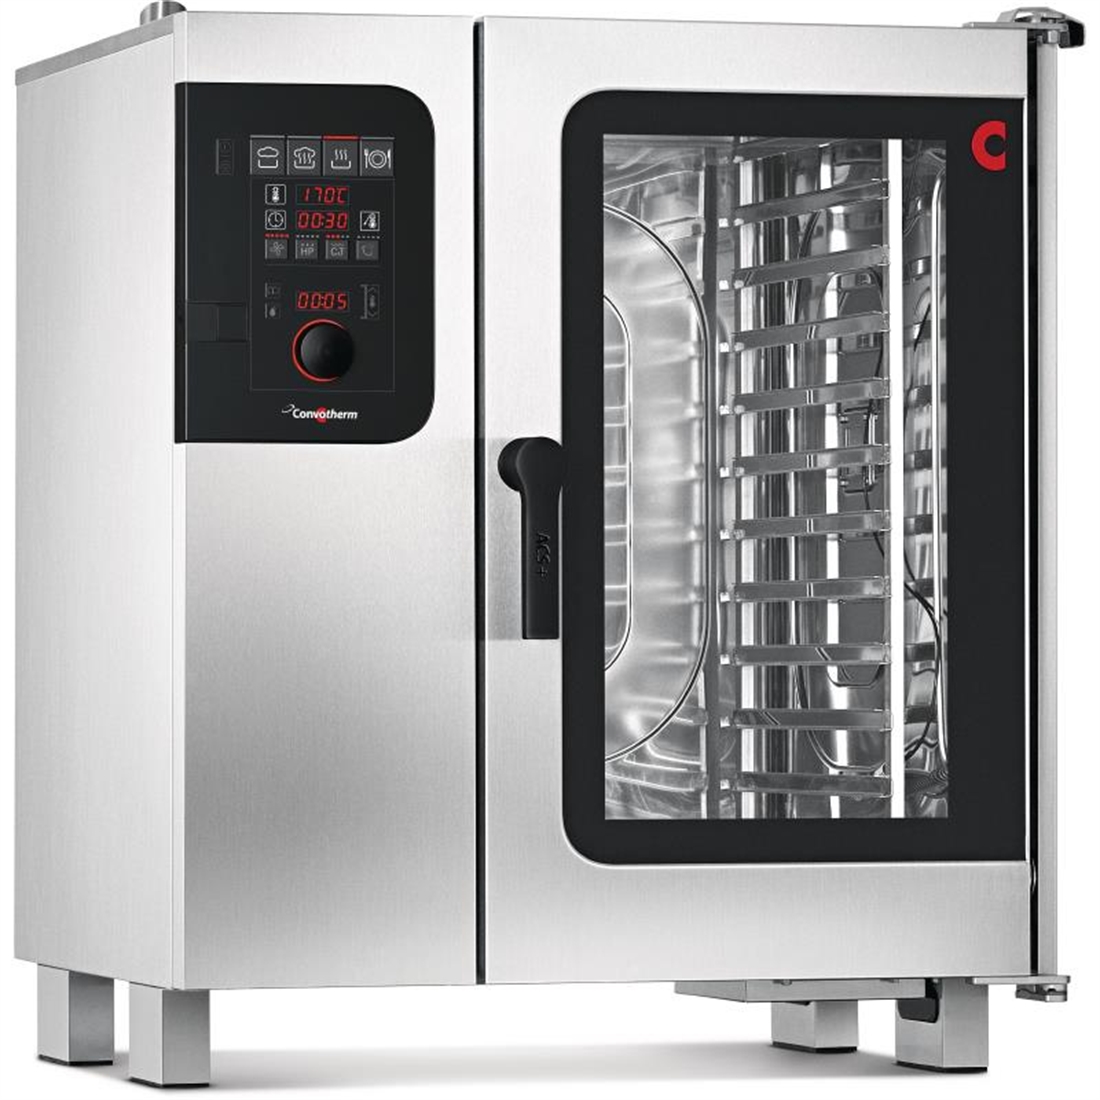 Convotherm 4 easyDial Combi Oven 10 x 1 x1 GN Grid with ConvoGrill and Install